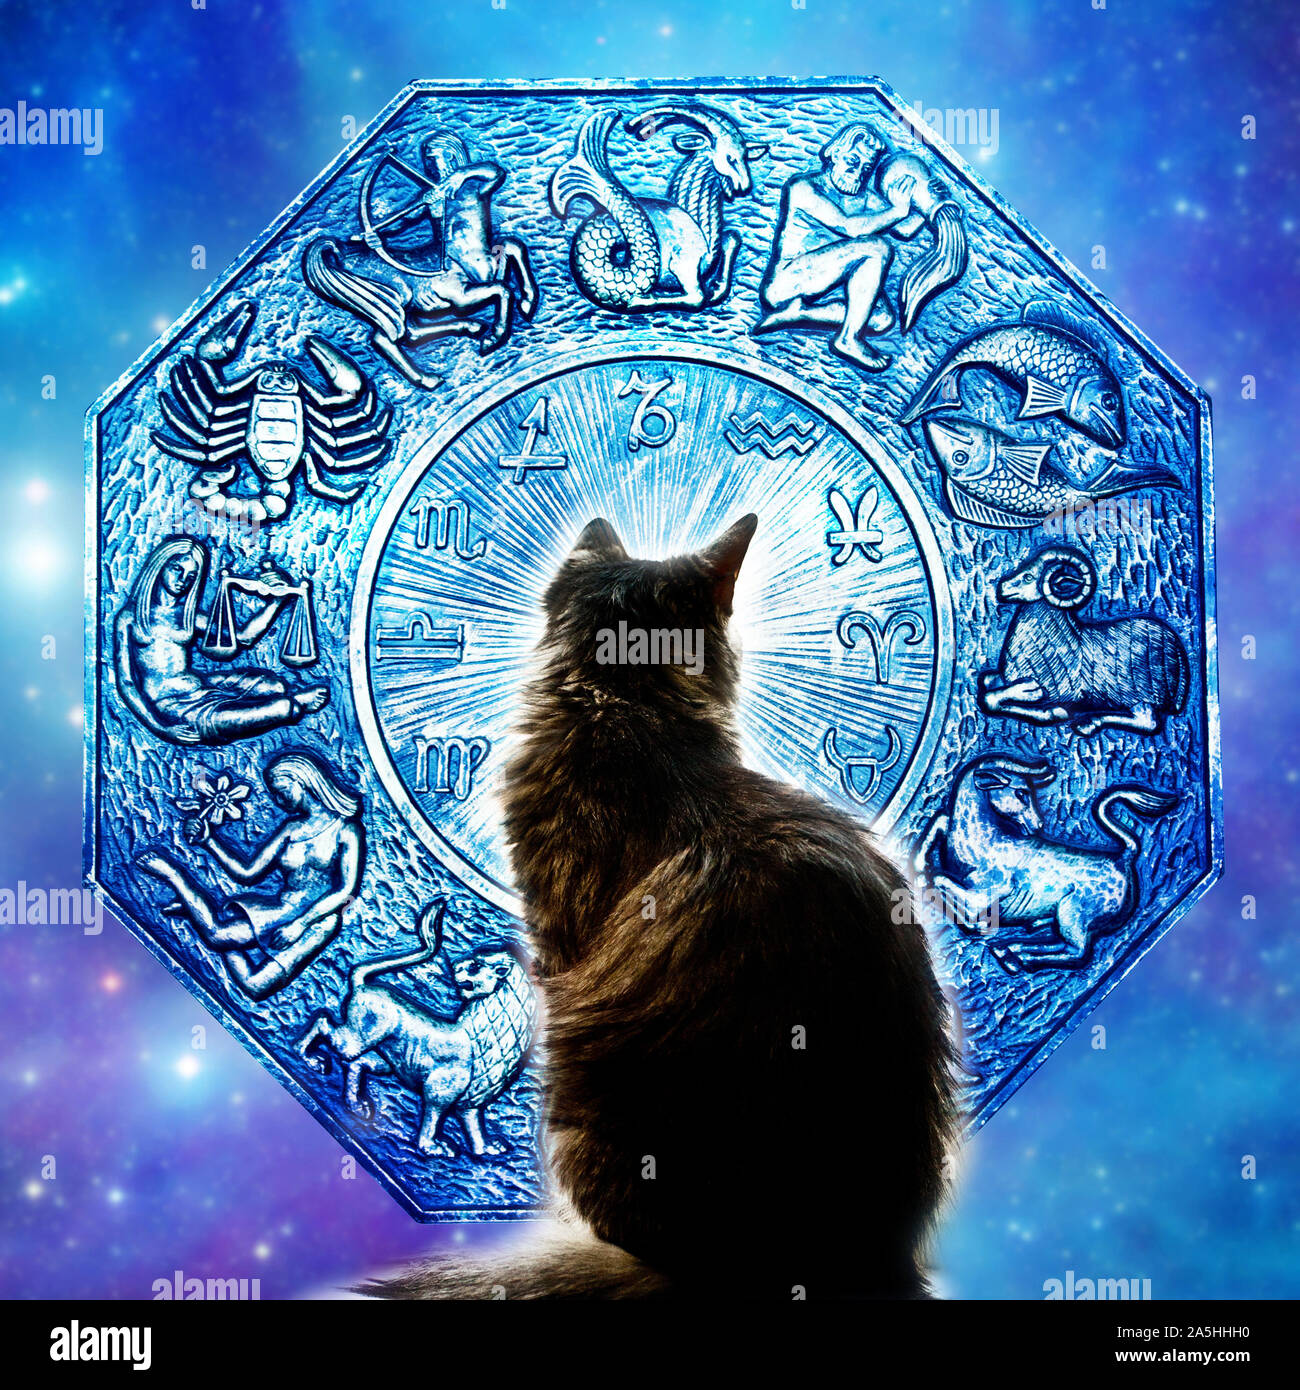 astrology chart with all zodiac signs and cat in the center Stock Photo